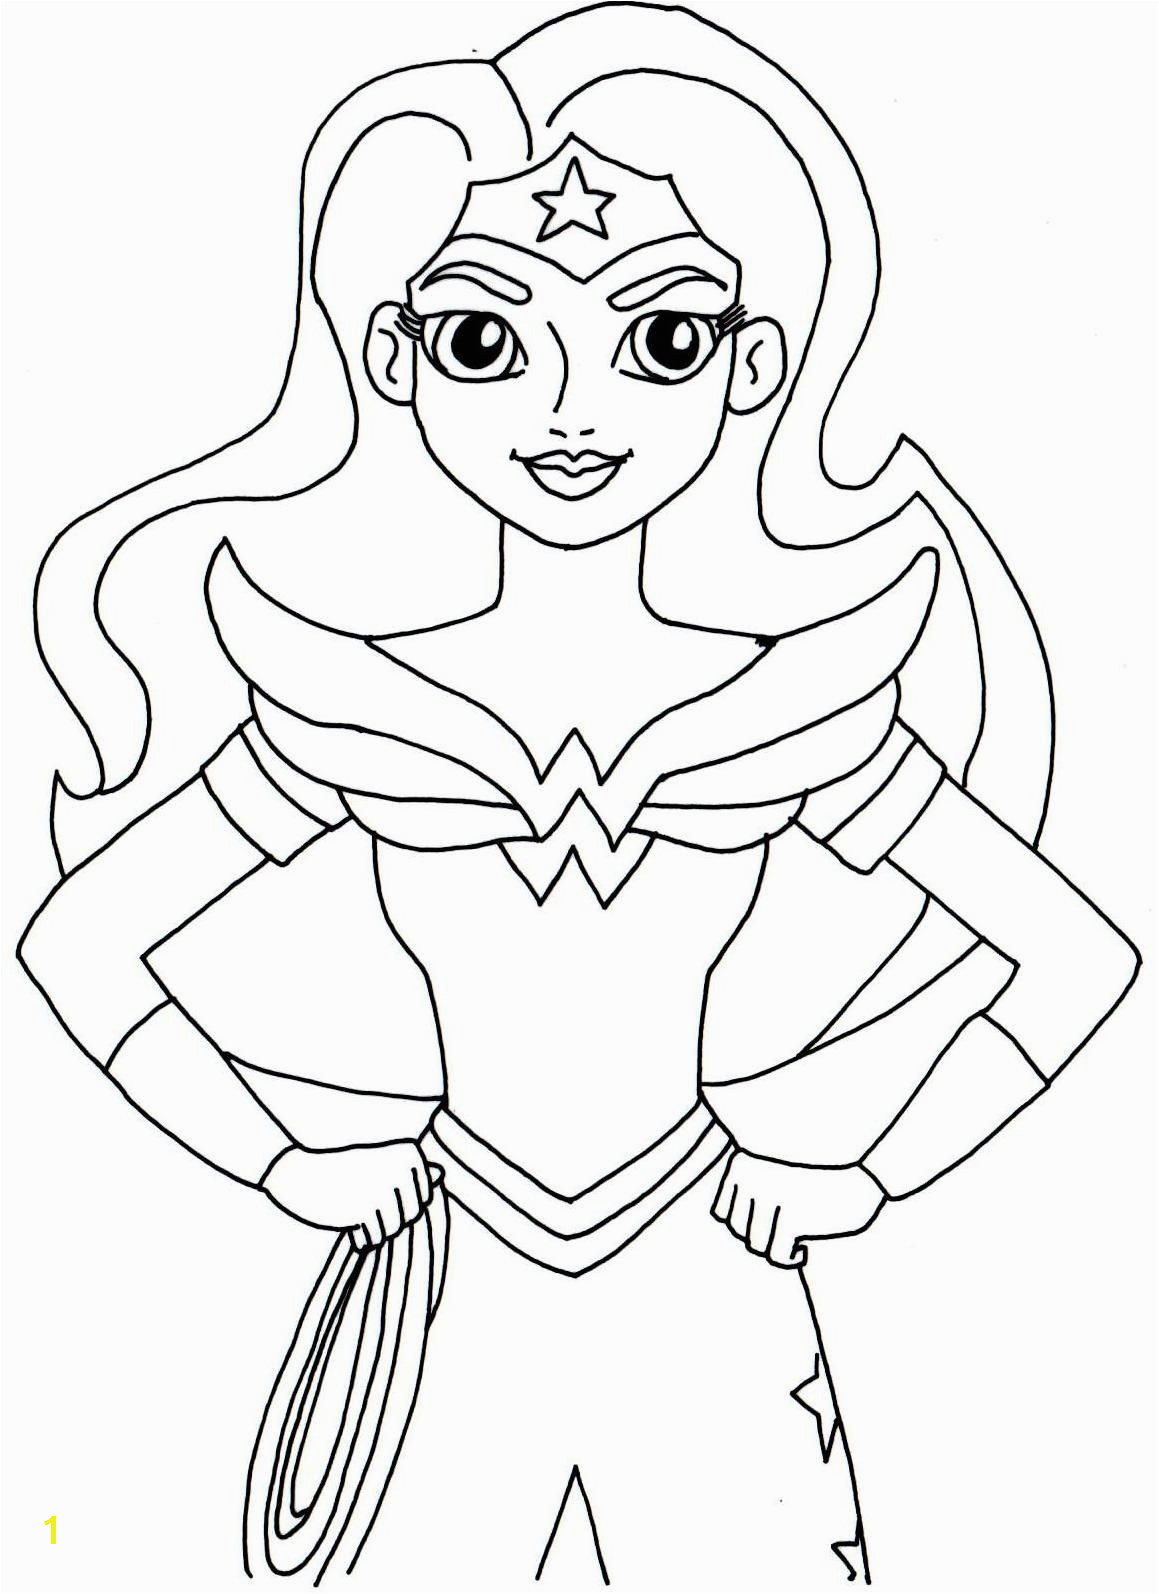 Superhero Coloring Pages Coloring Pages Women Luxury Superhero Coloring Pages Awesome 0 0d Spiderman Rituals